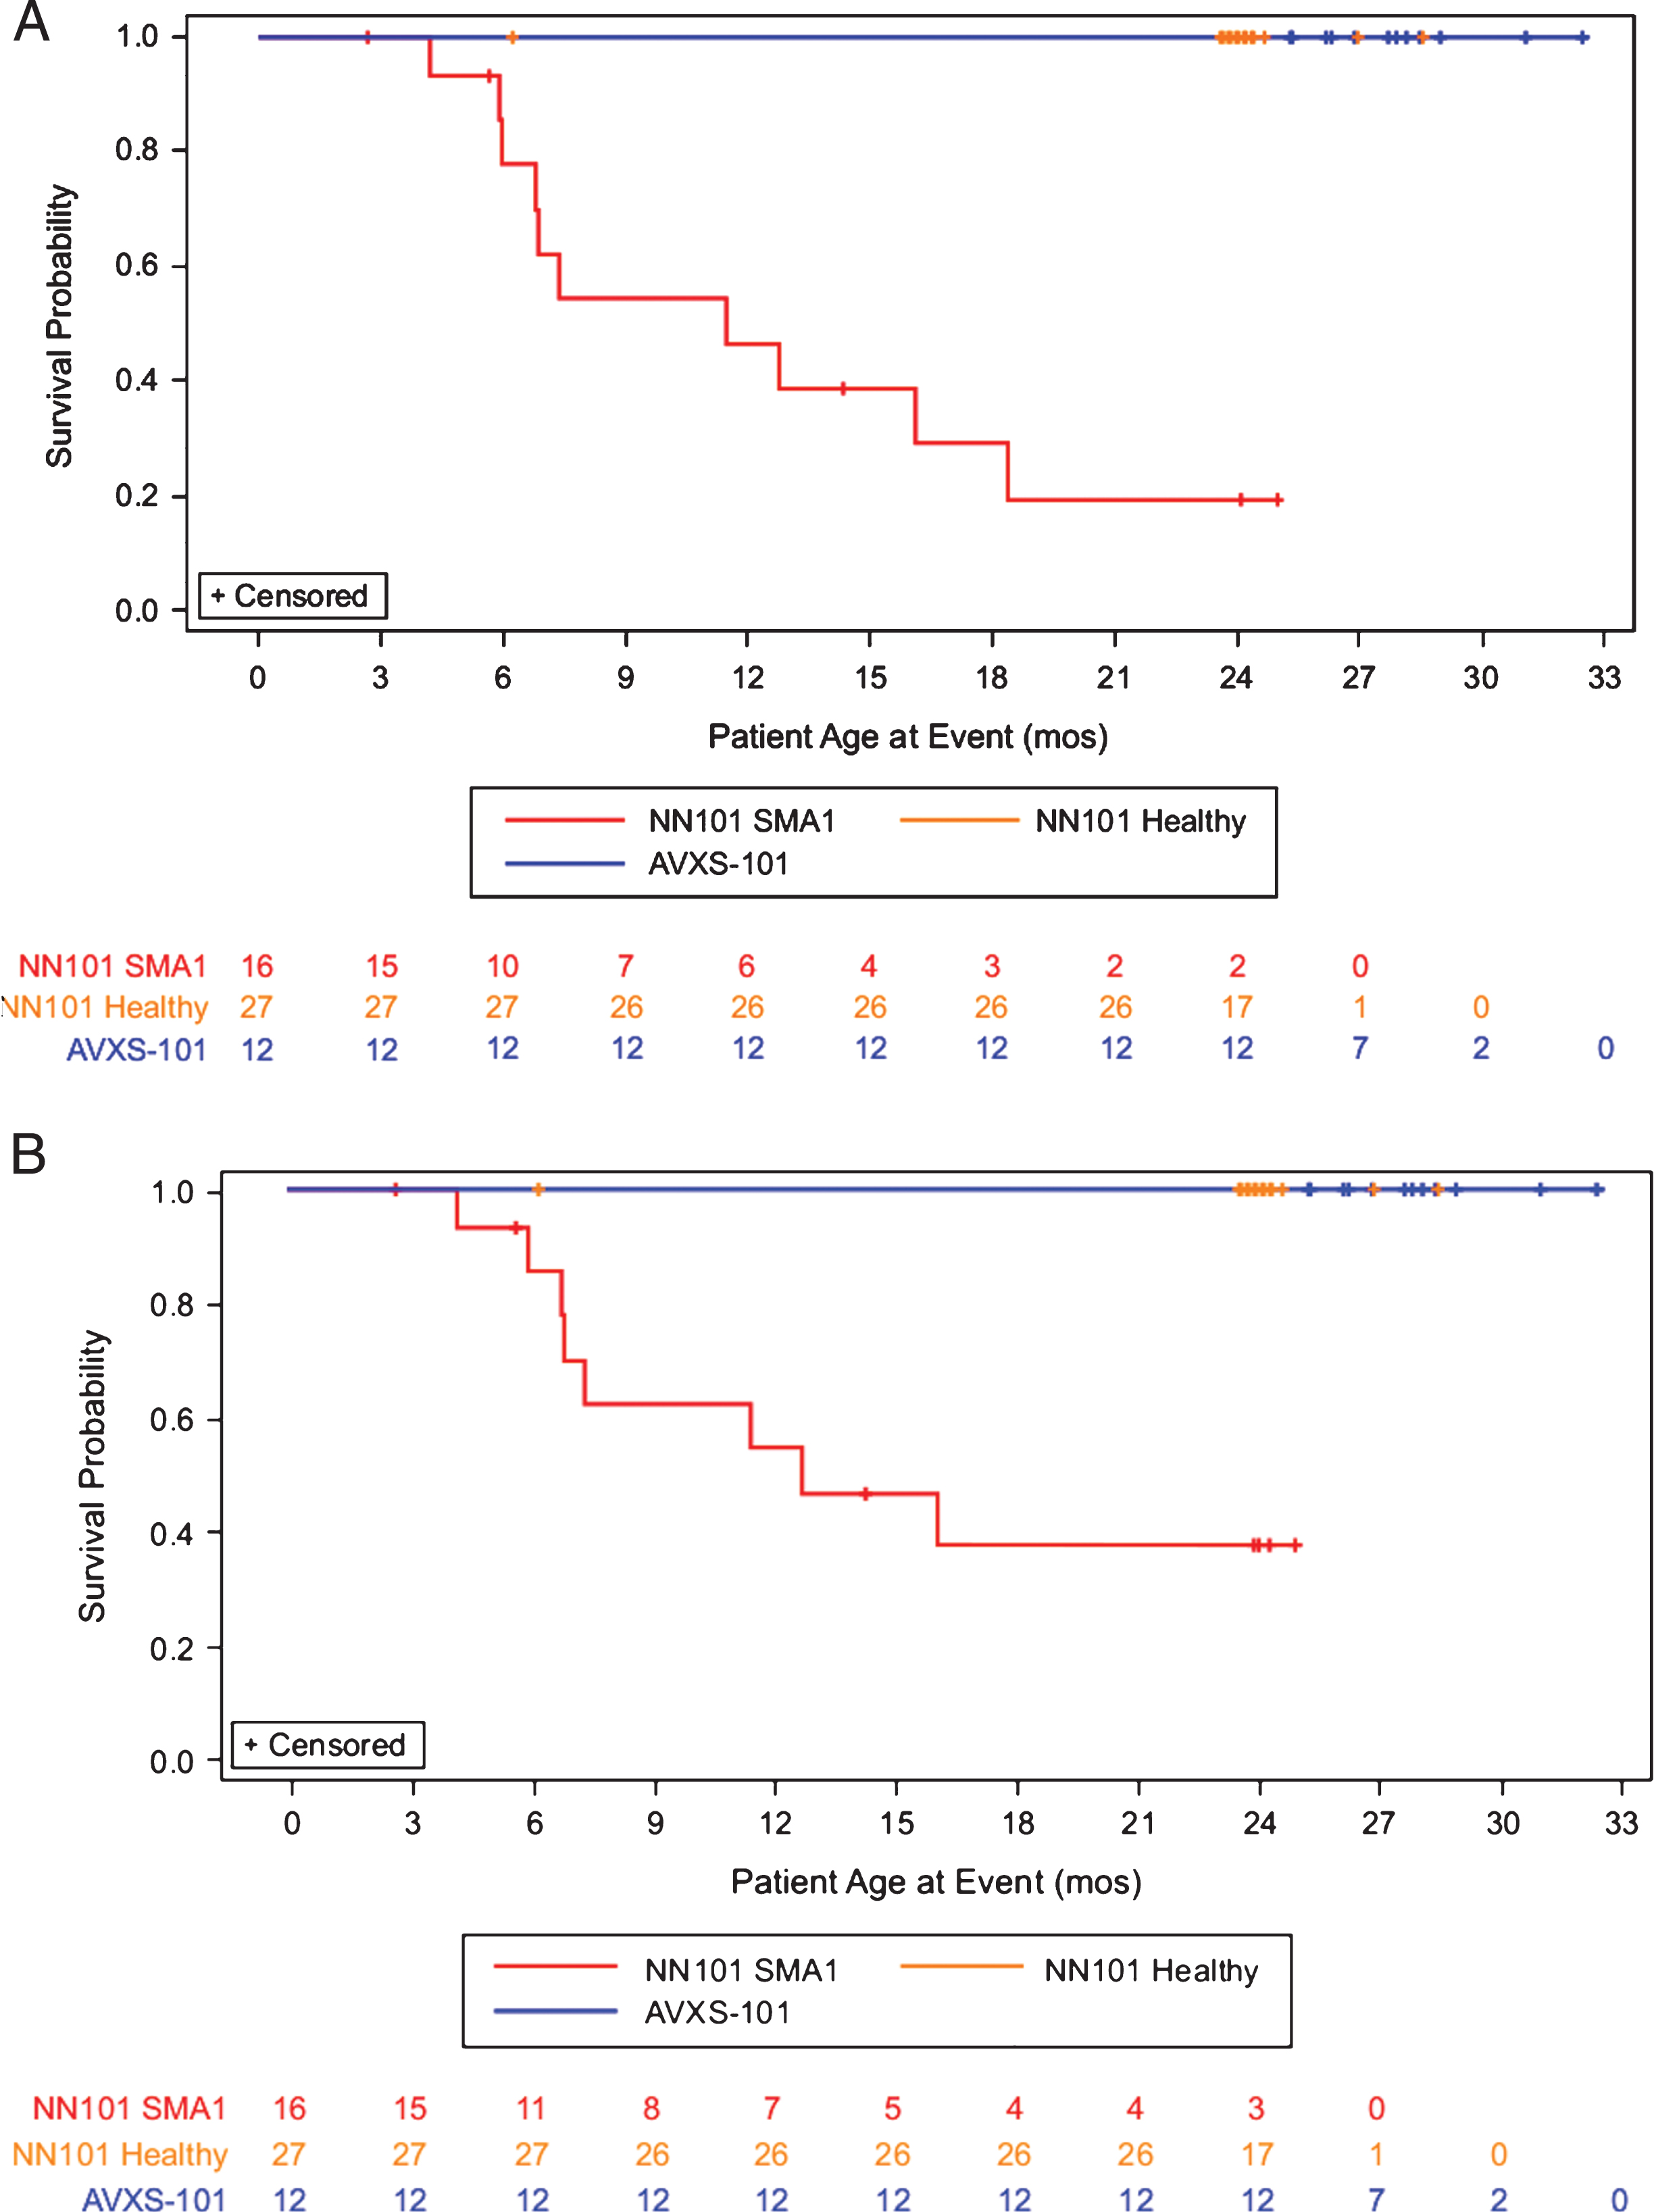 Permanent ventilation-free survival probability analysis. Survival analysis of the (A) composite survival endpoint (death or permanent ventilation) or (B) survival alone for infants with SMA1 in the AVXS-101–treated (green line, n = 12), NN101 infants with SMA1 (blue line, n = 16), NN101 healthy infant (orange line, n = 27) cohorts. All infants in the AVXS-101 study completed this 24-month follow-up study without permanent ventilation. In the NN101 study, infants with SMA1 either reached the composite endpoint (n = 10), were removed from the study by a parent or guardian or were lost to follow-up (n = 5), or completed the study and reached 24 months of age without reaching the endpoint (n = 1). SMA1, spinal muscular atrophy type 1.